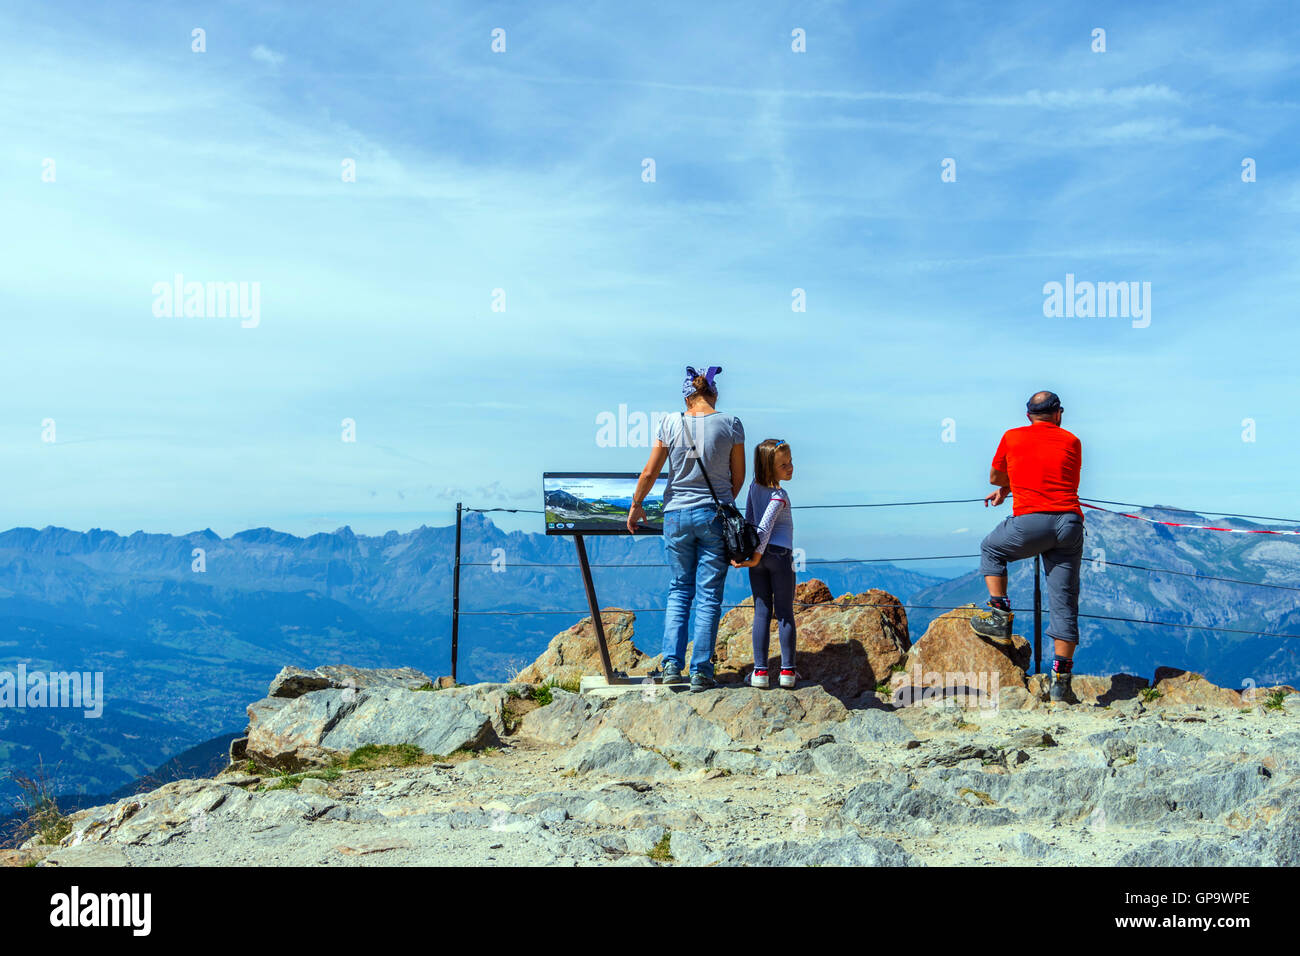 Family group at view-point, Nid d'Aigle, Chamonix, France Stock Photo